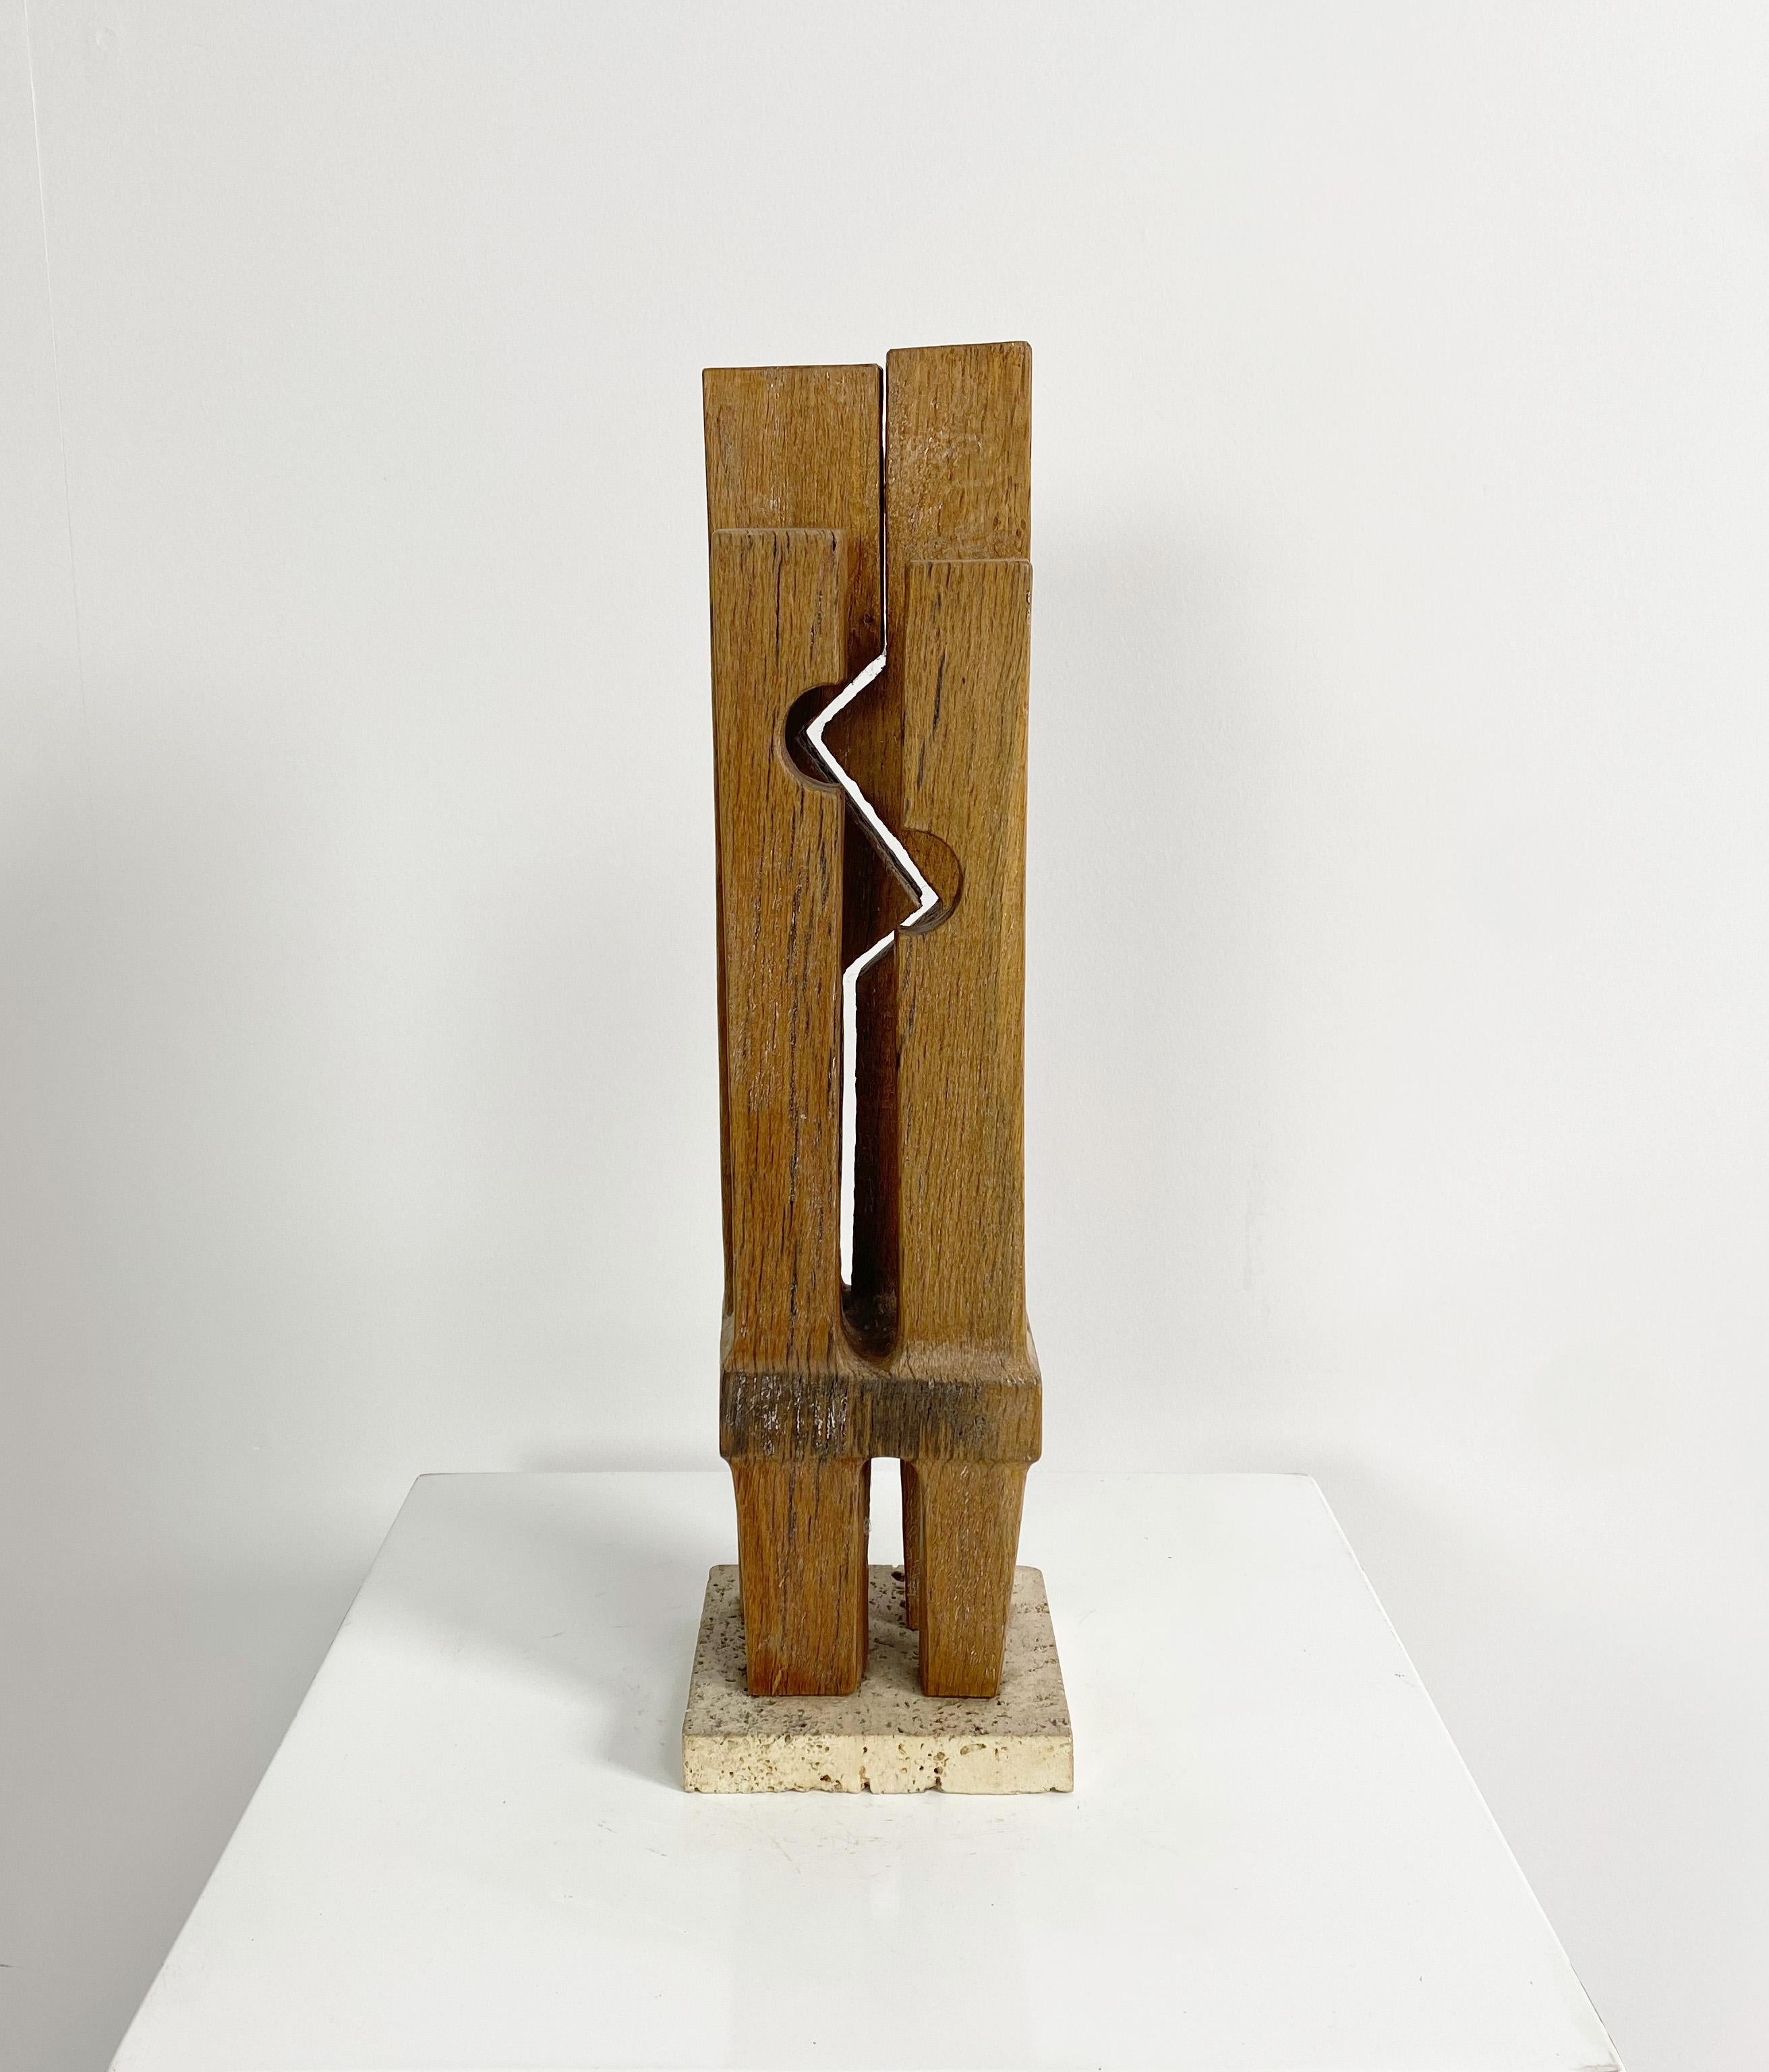 Abstract Wooden Sculpture 'Untitled' by Ronald Pope 2